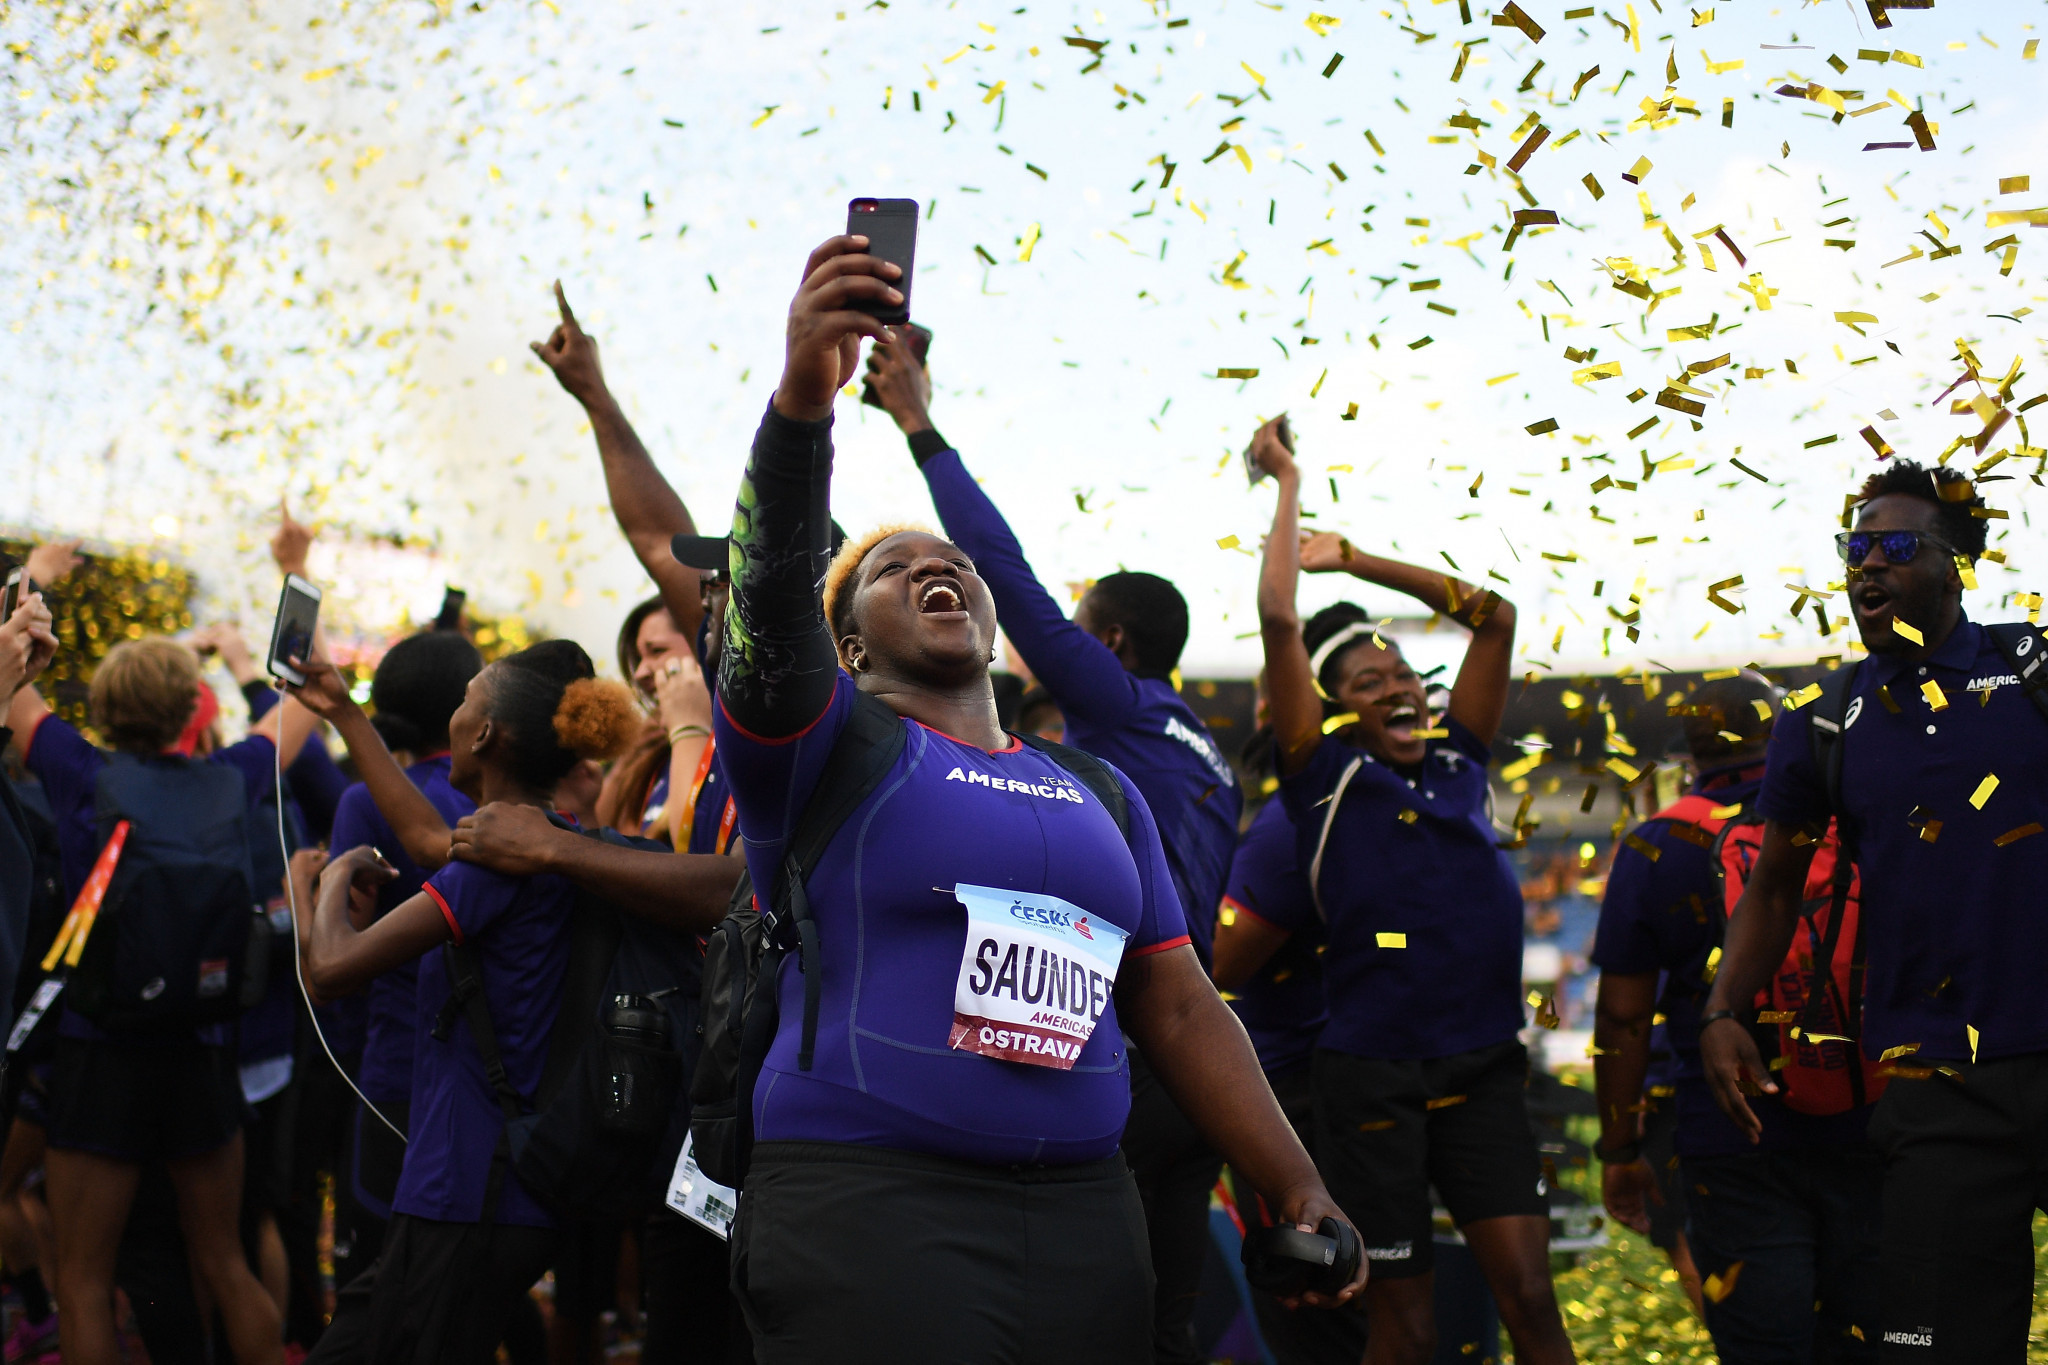 Team Americas celebrate winning the IAAF Continental Cup ©Getty Images  